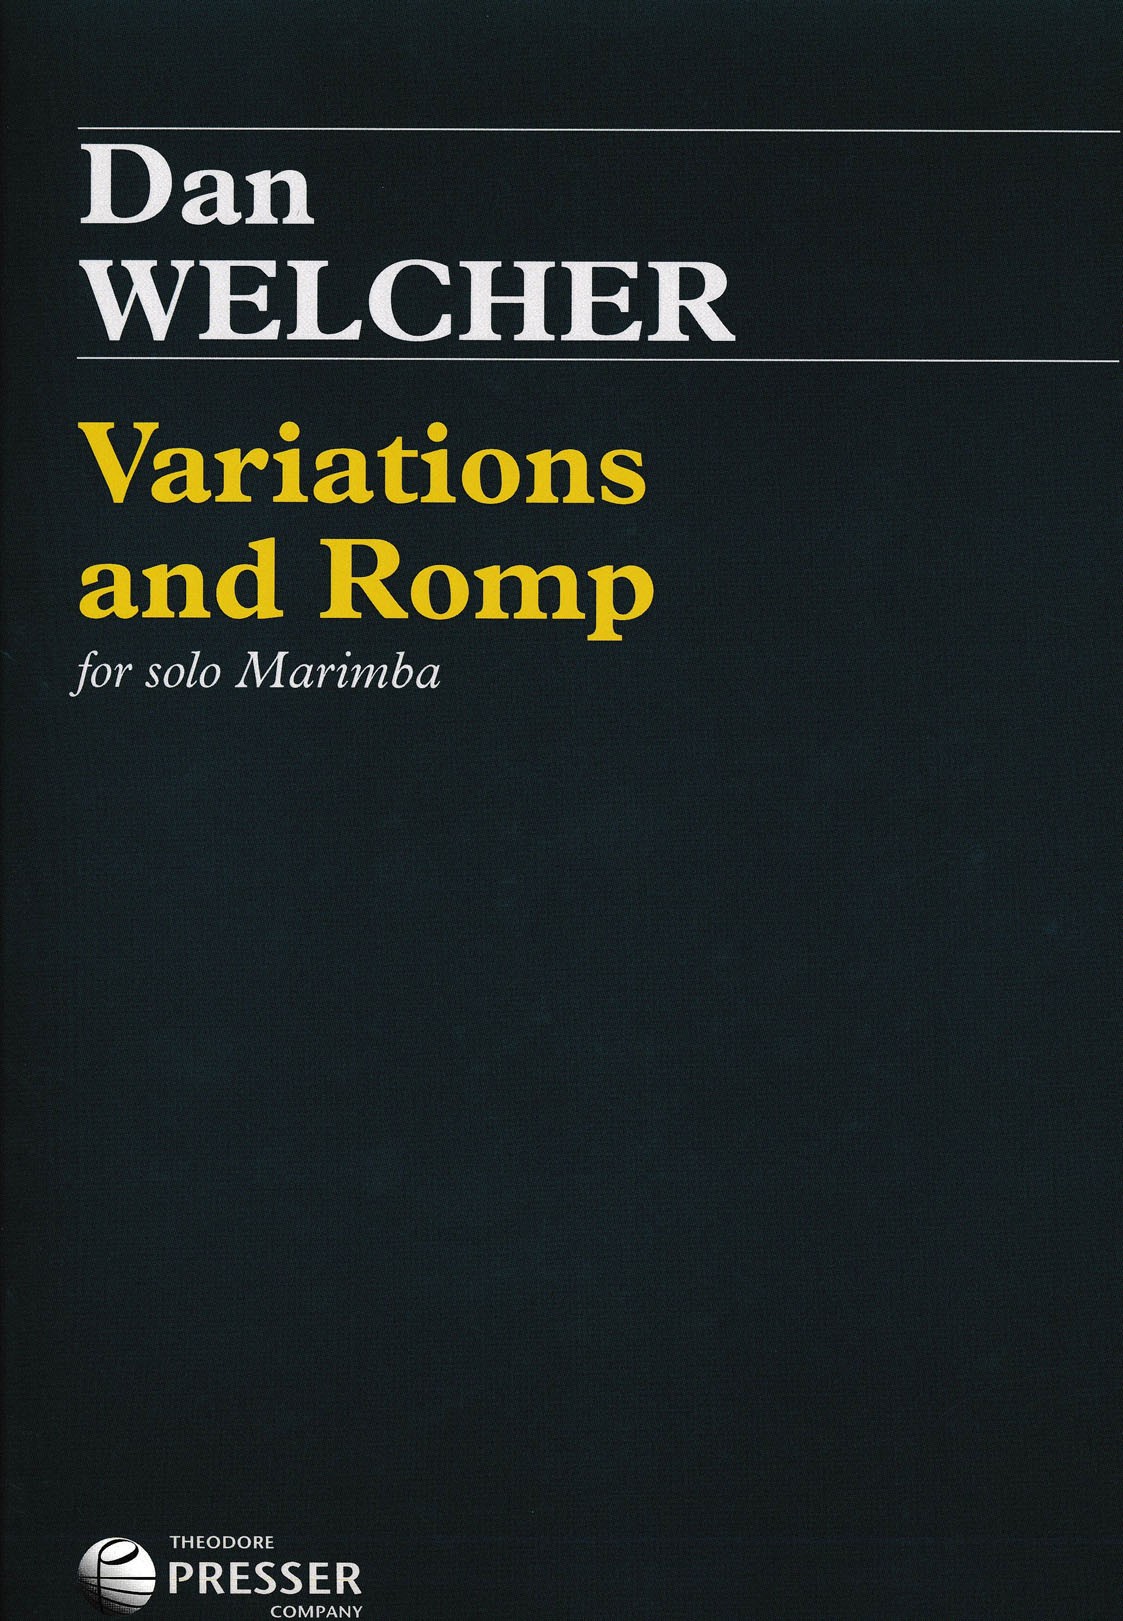 Variations And Romp by Dan Welcher